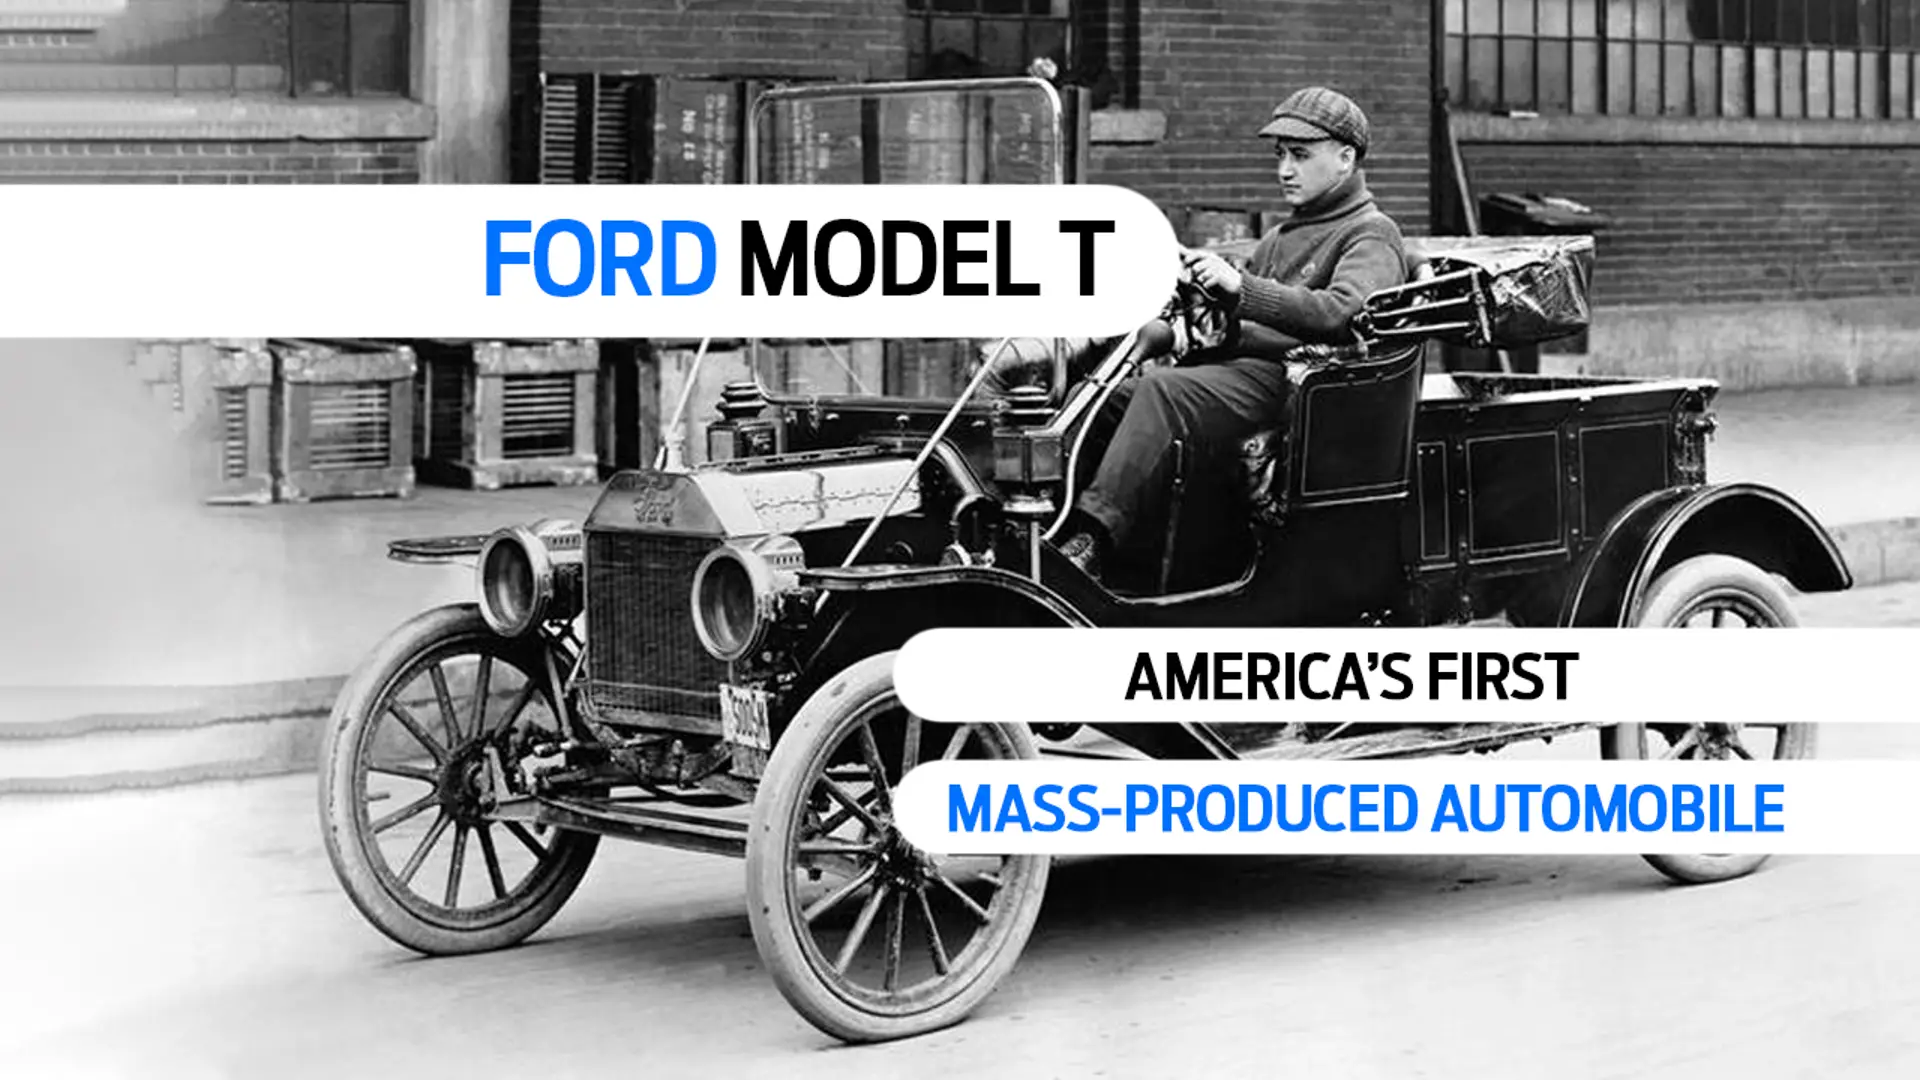 how many model ts were sold in america